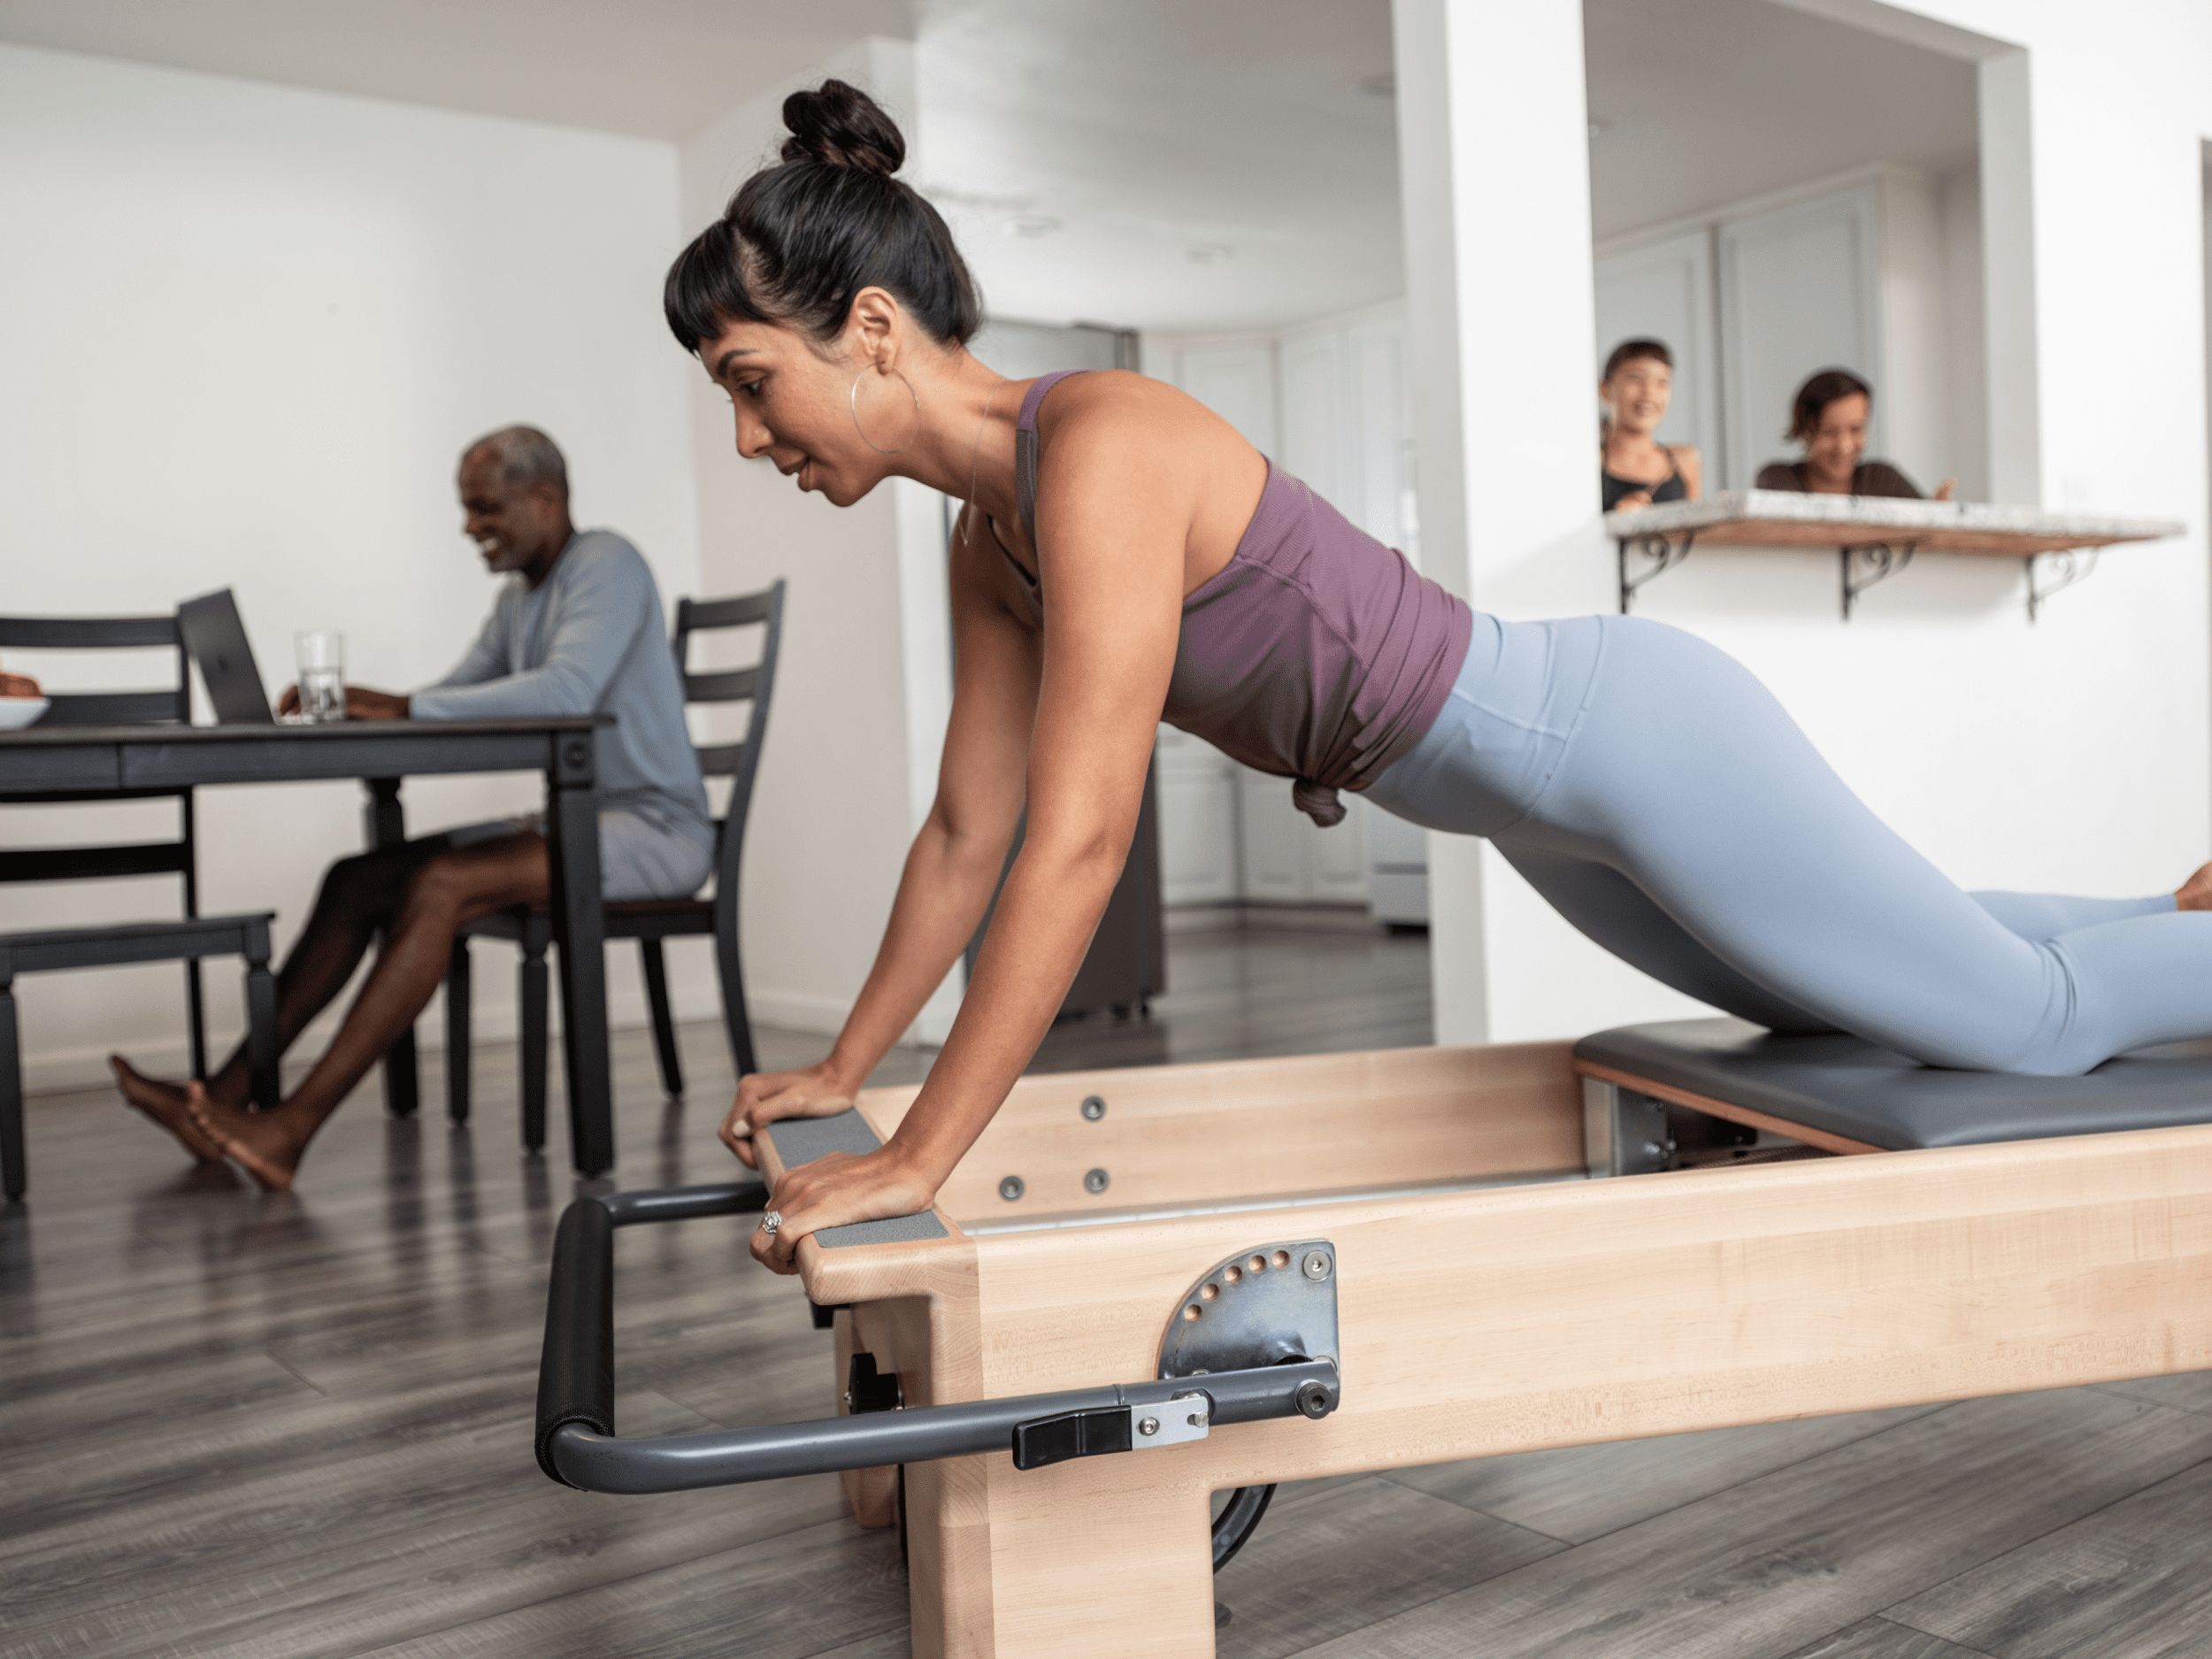 Woman demonstrating a controlled Pilates movement on a Pilates Studio Reformer, highlighting her core stability and precise alignment.